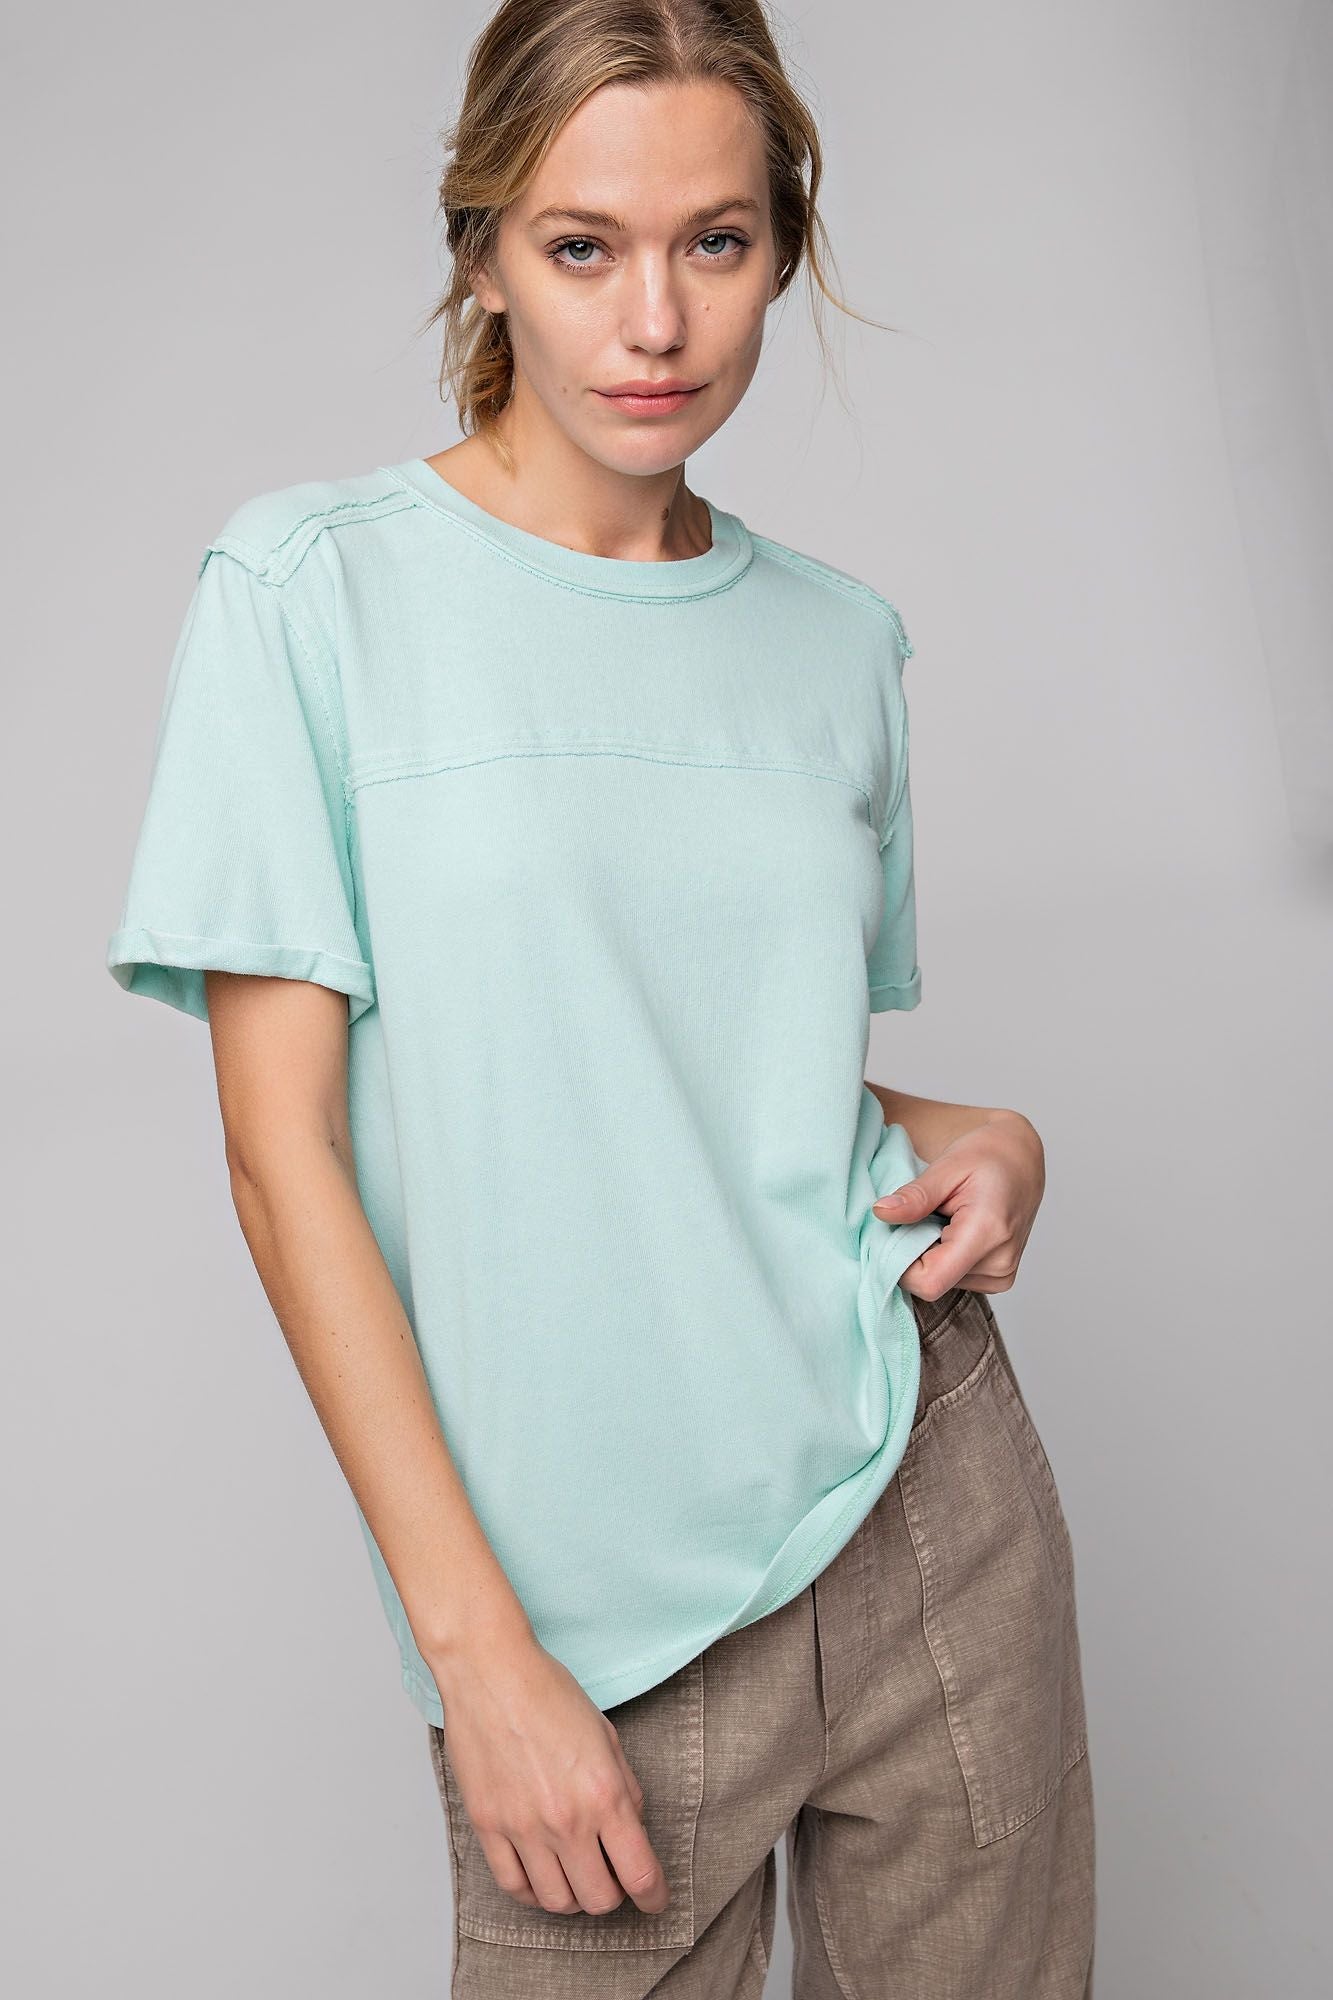 Easel Coral tee